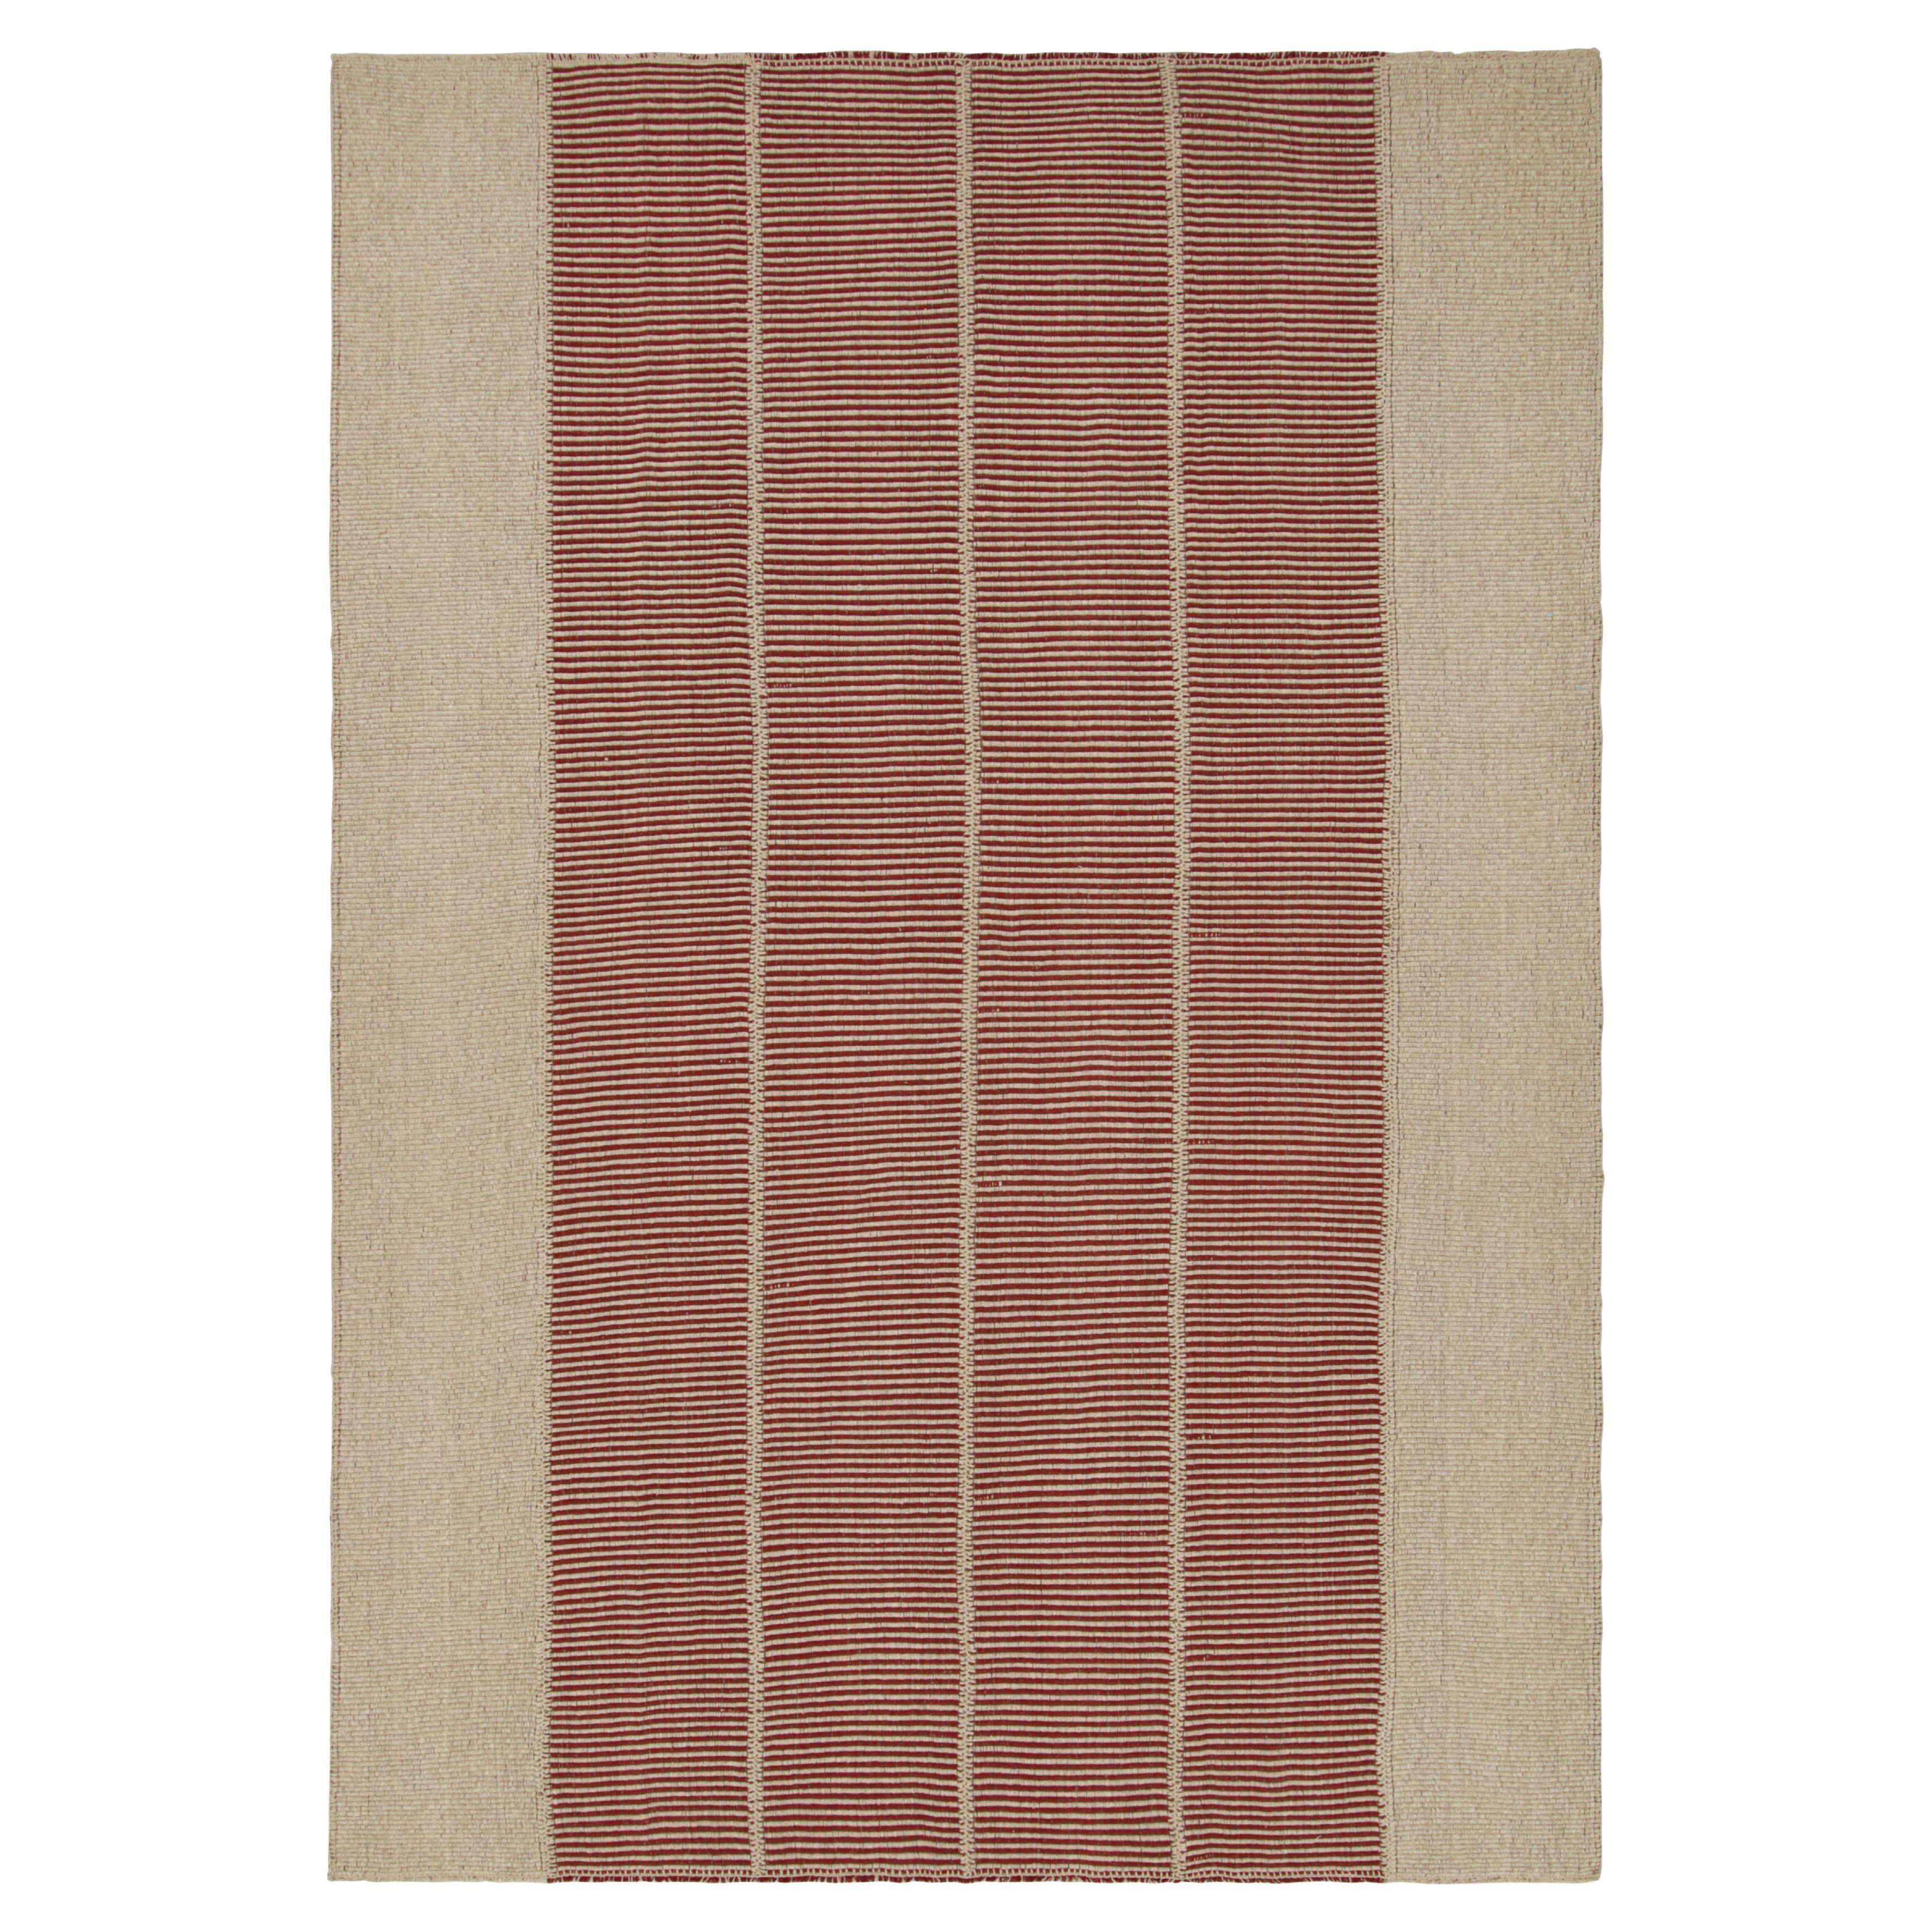 Rug & Kilim’s Contemporary Kilim in Red and Beige Textural Stripes  For Sale